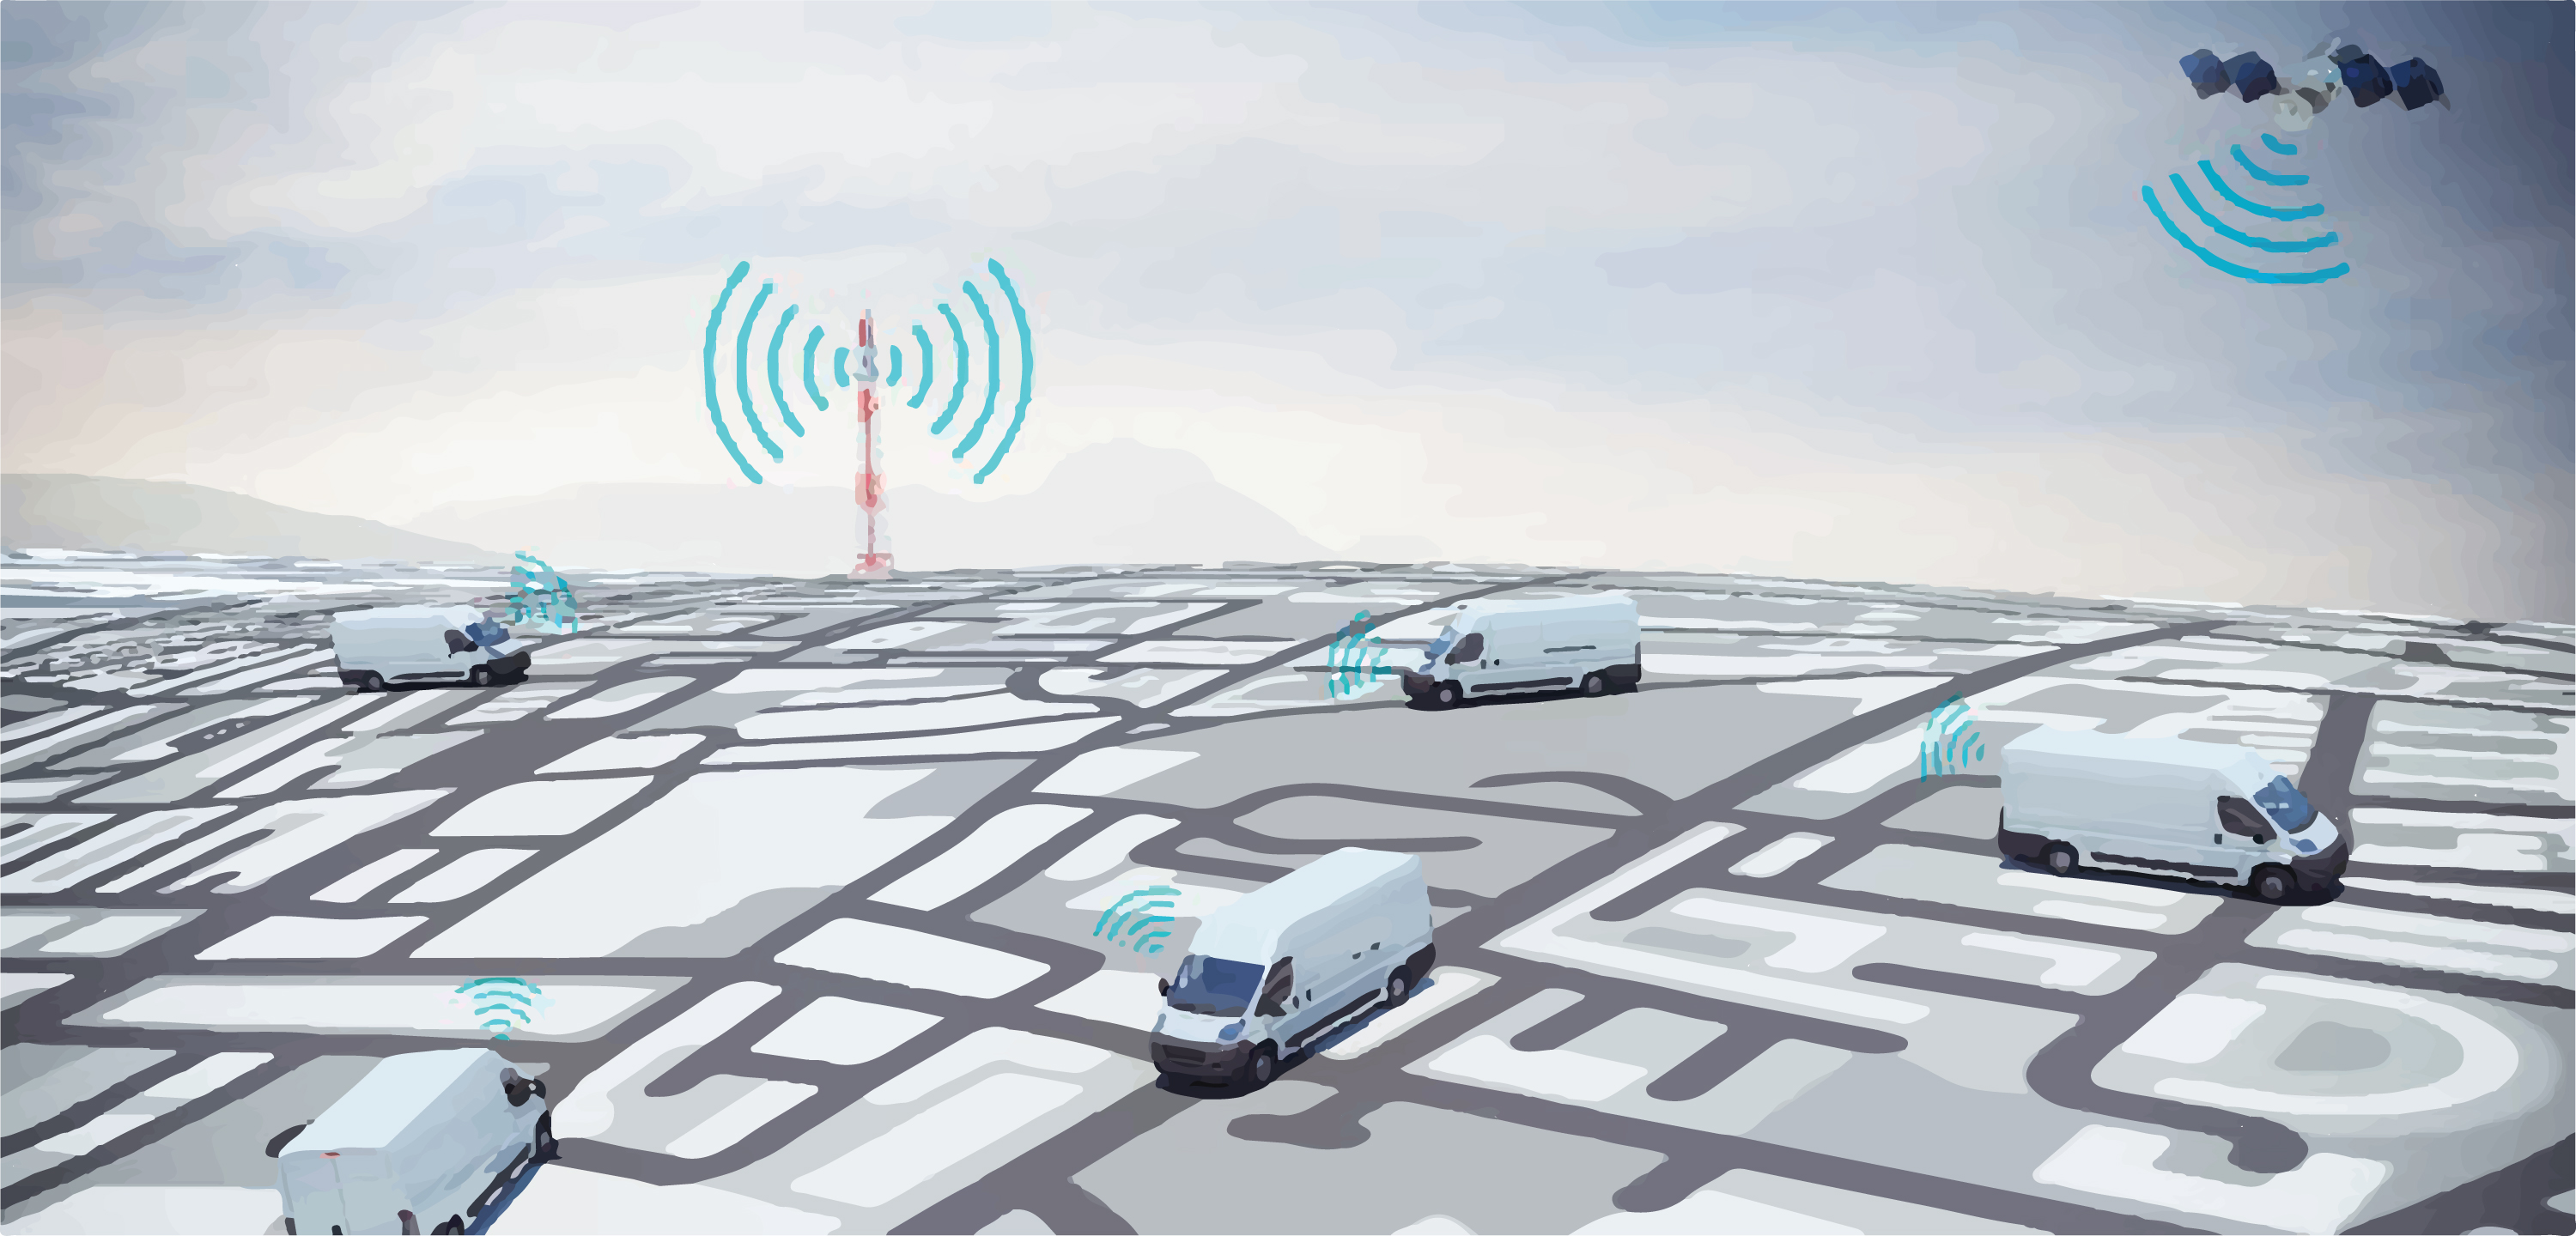 gps monitoring allows you to track transports on the map